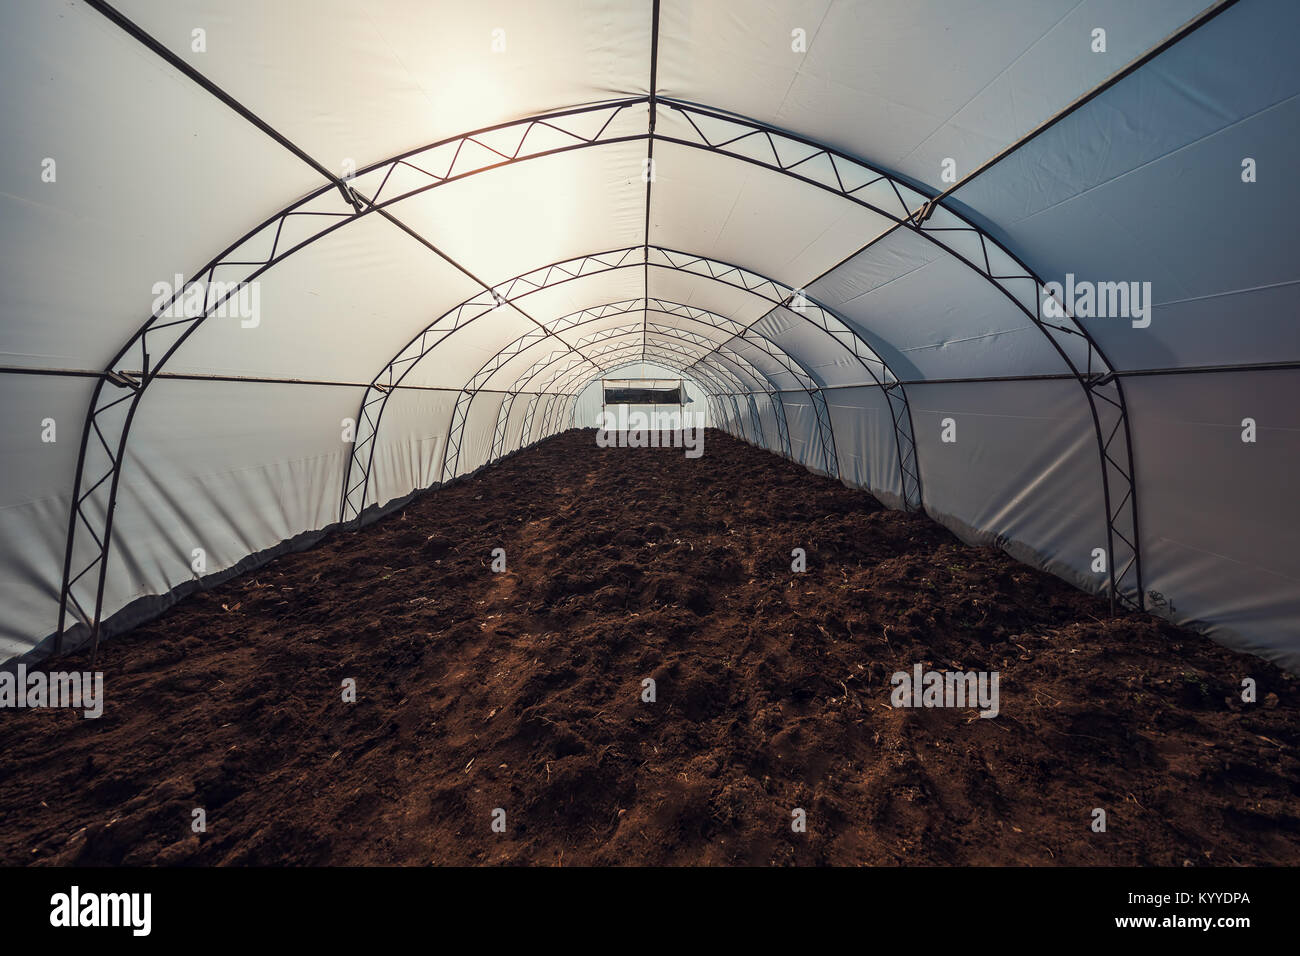 Inside view of greenhouse ready for planting. Stock Photo